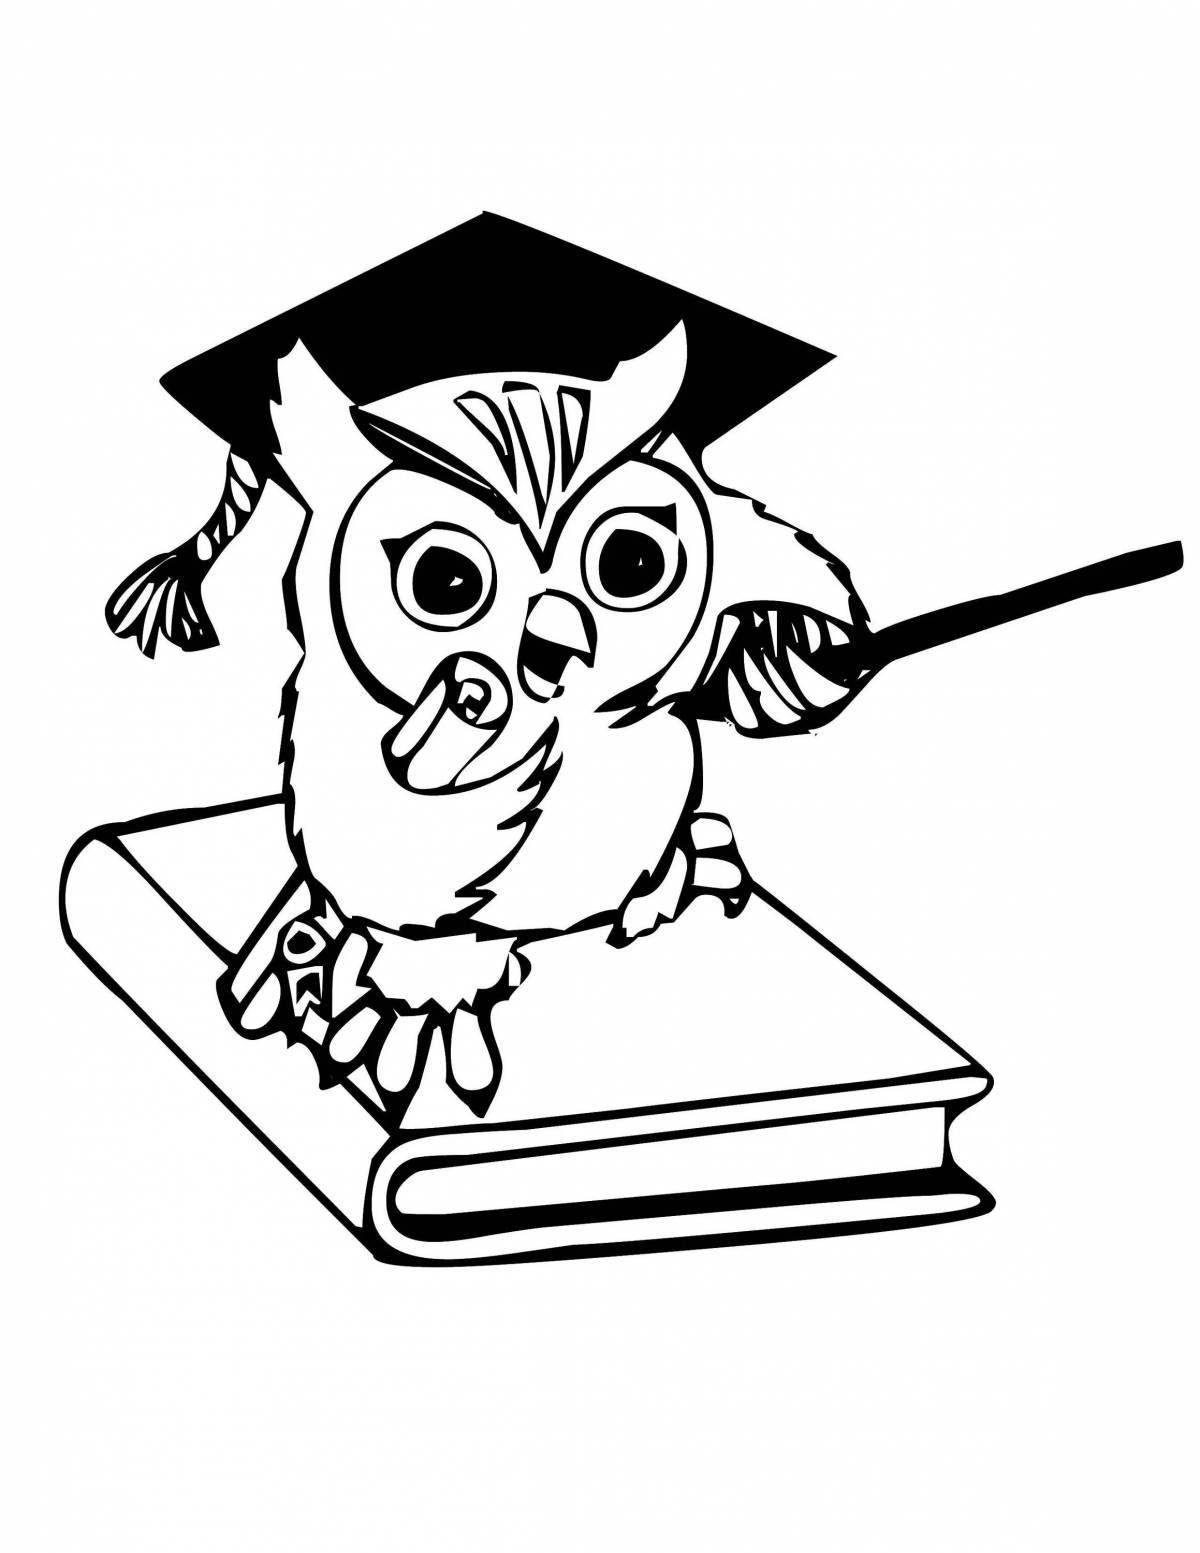 Bright smart owl coloring book for kids